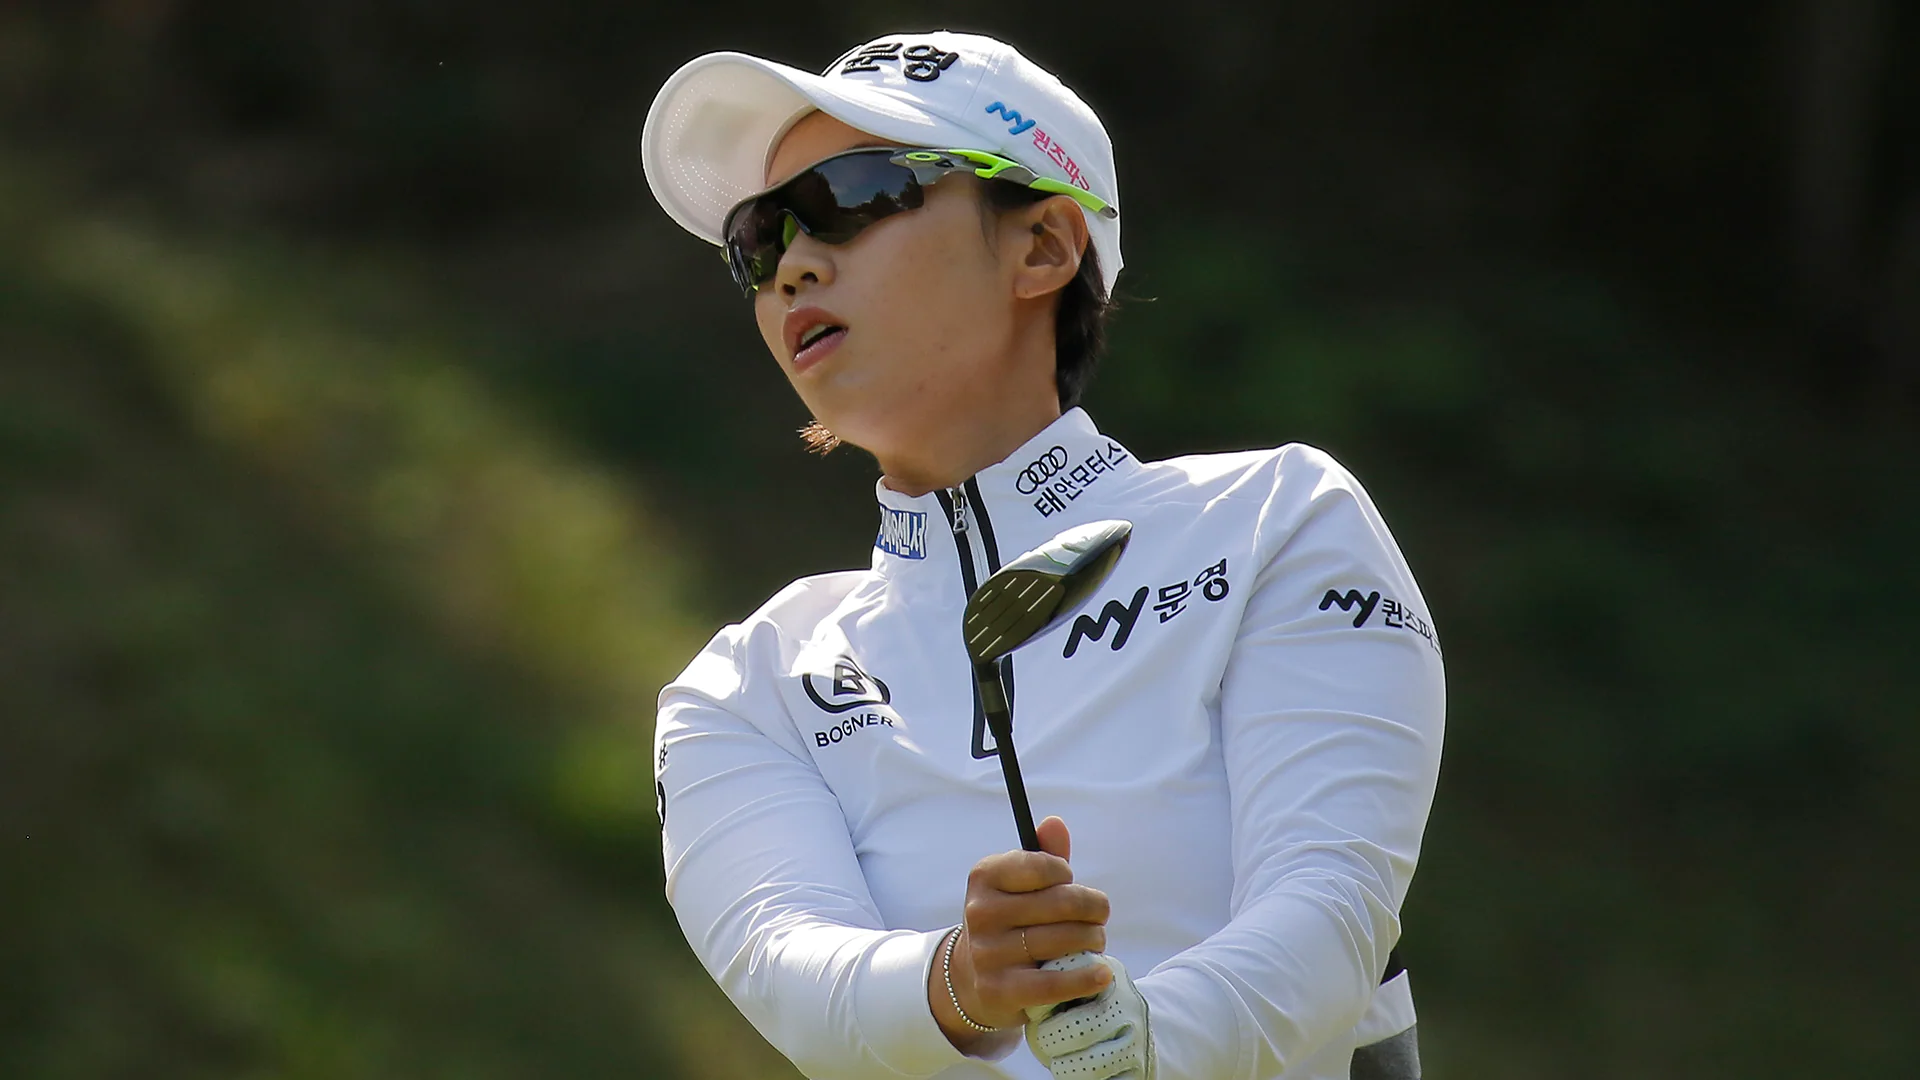 Co-leader at LPGA Q-Series playing in U.S. for just second time ever